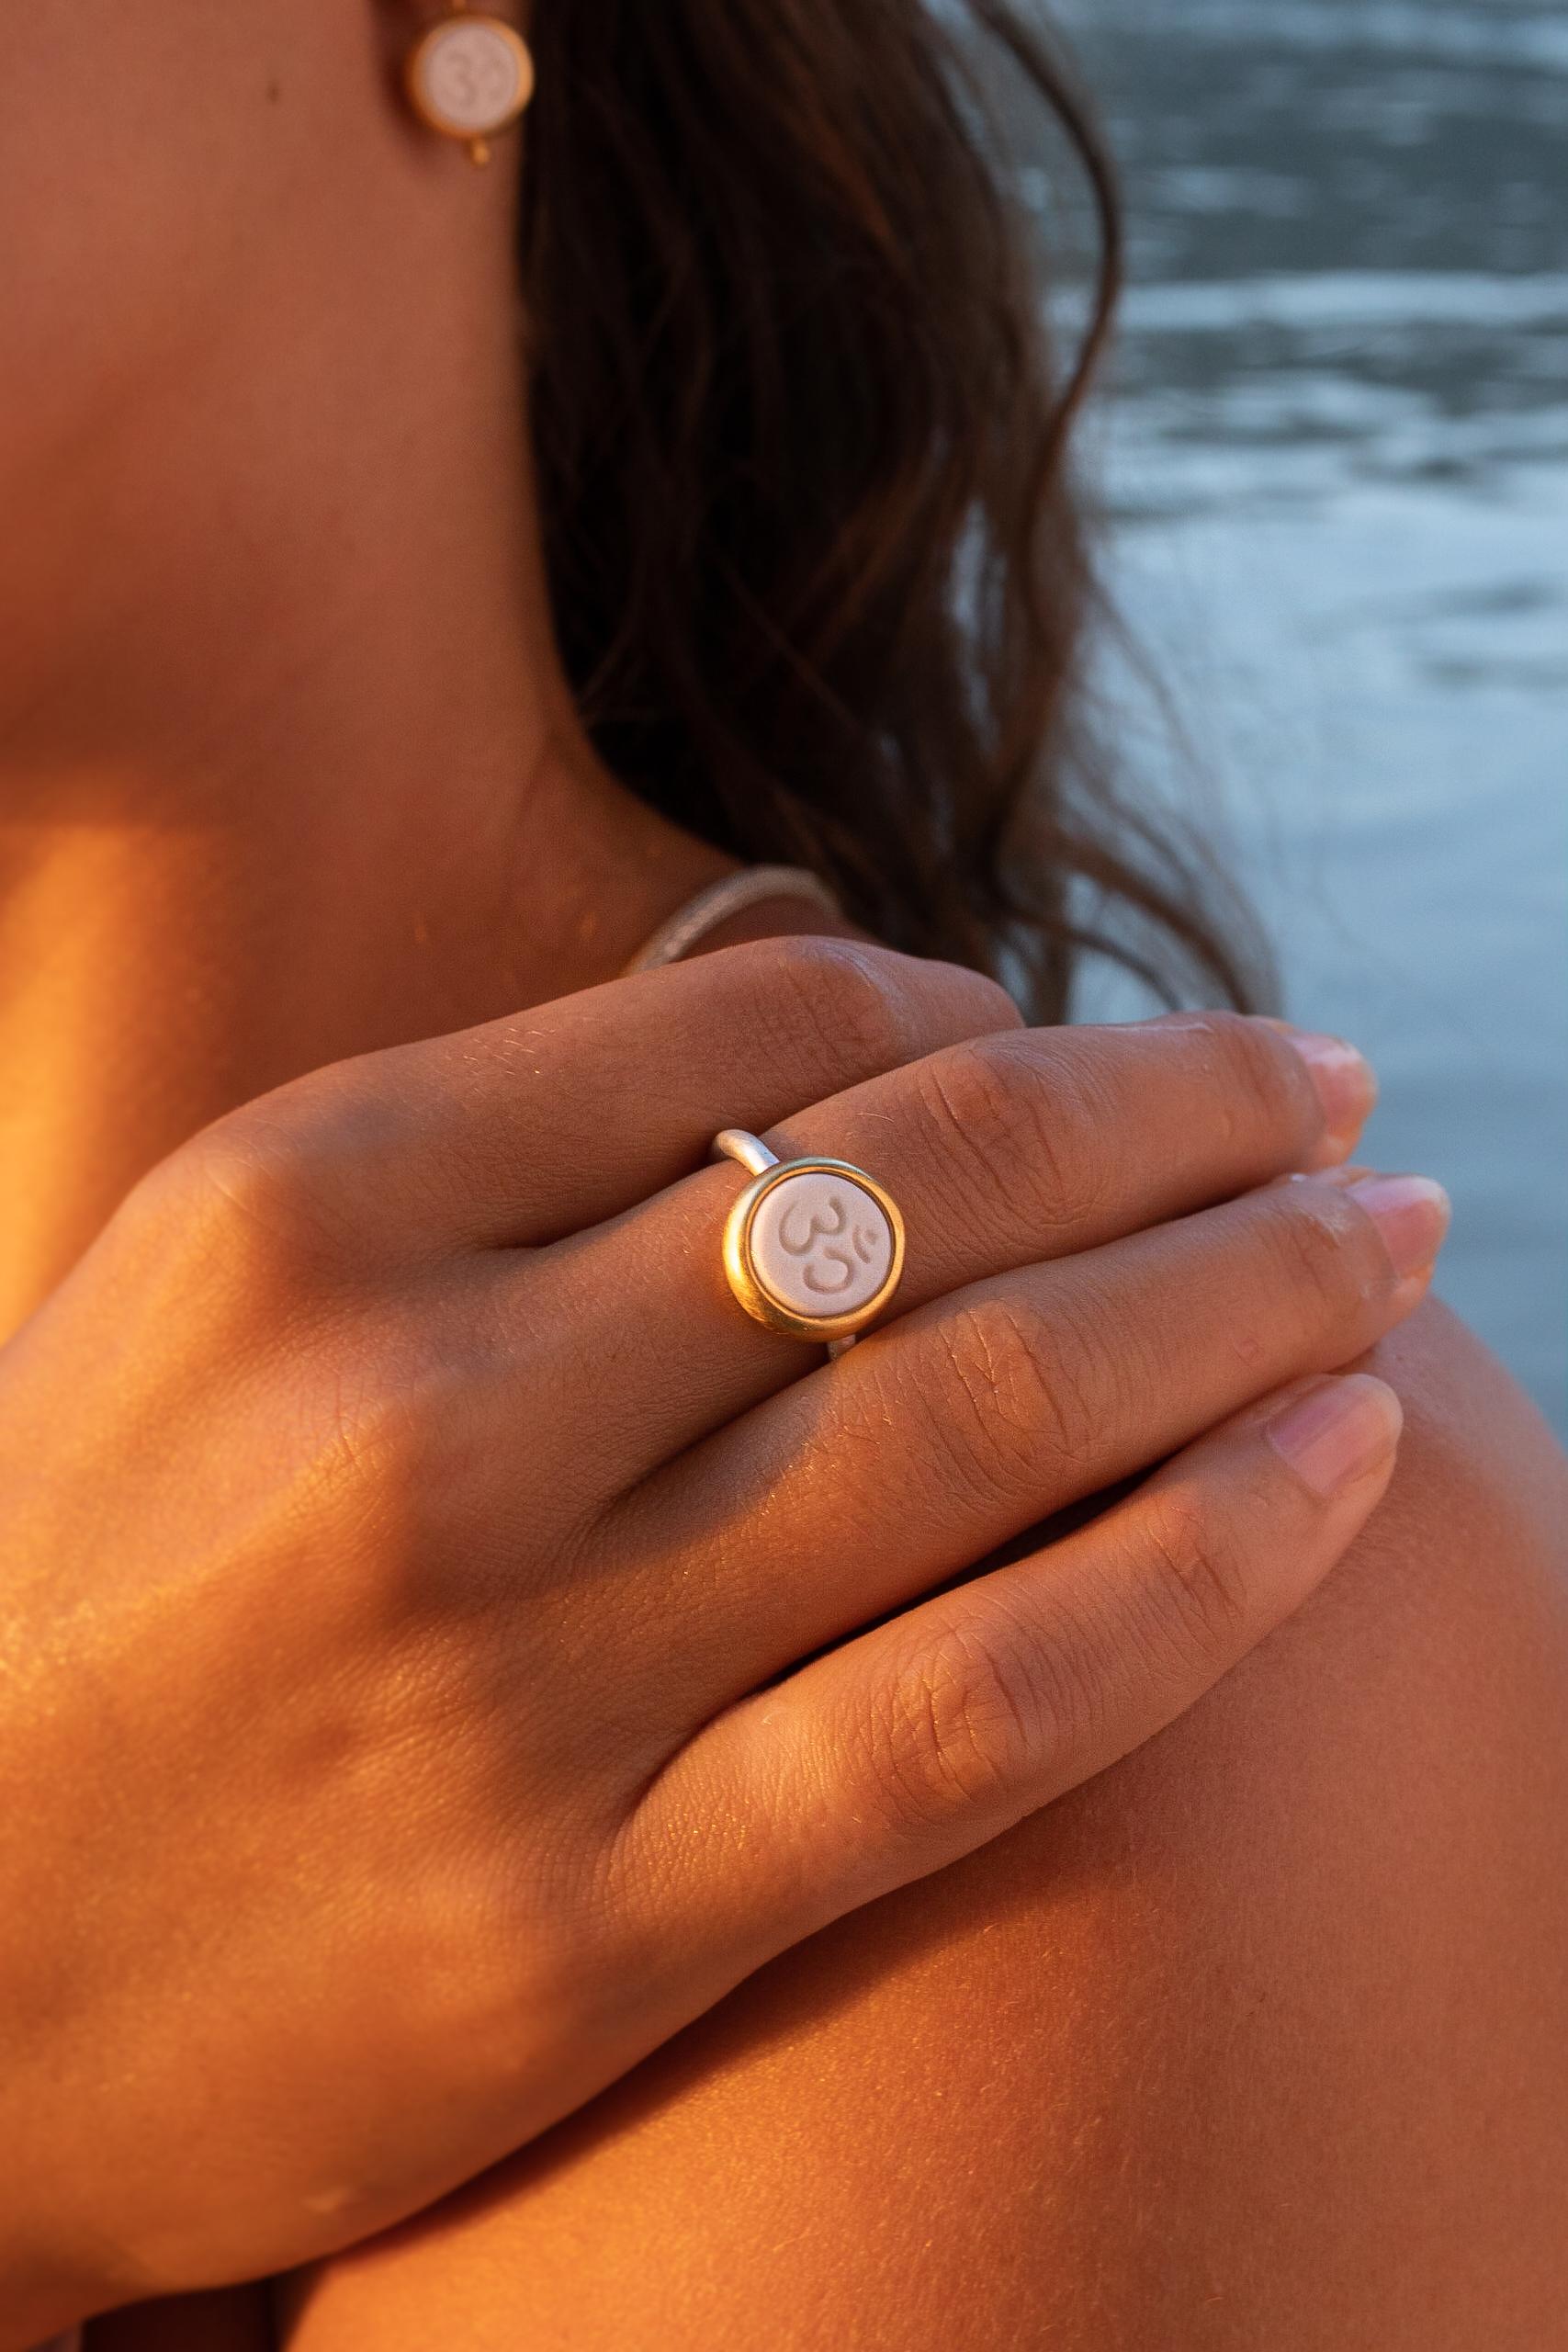 For Sale:  Monika Herré Porcelain Ring Ohm Symbol Small sterling silver gold-plated 3